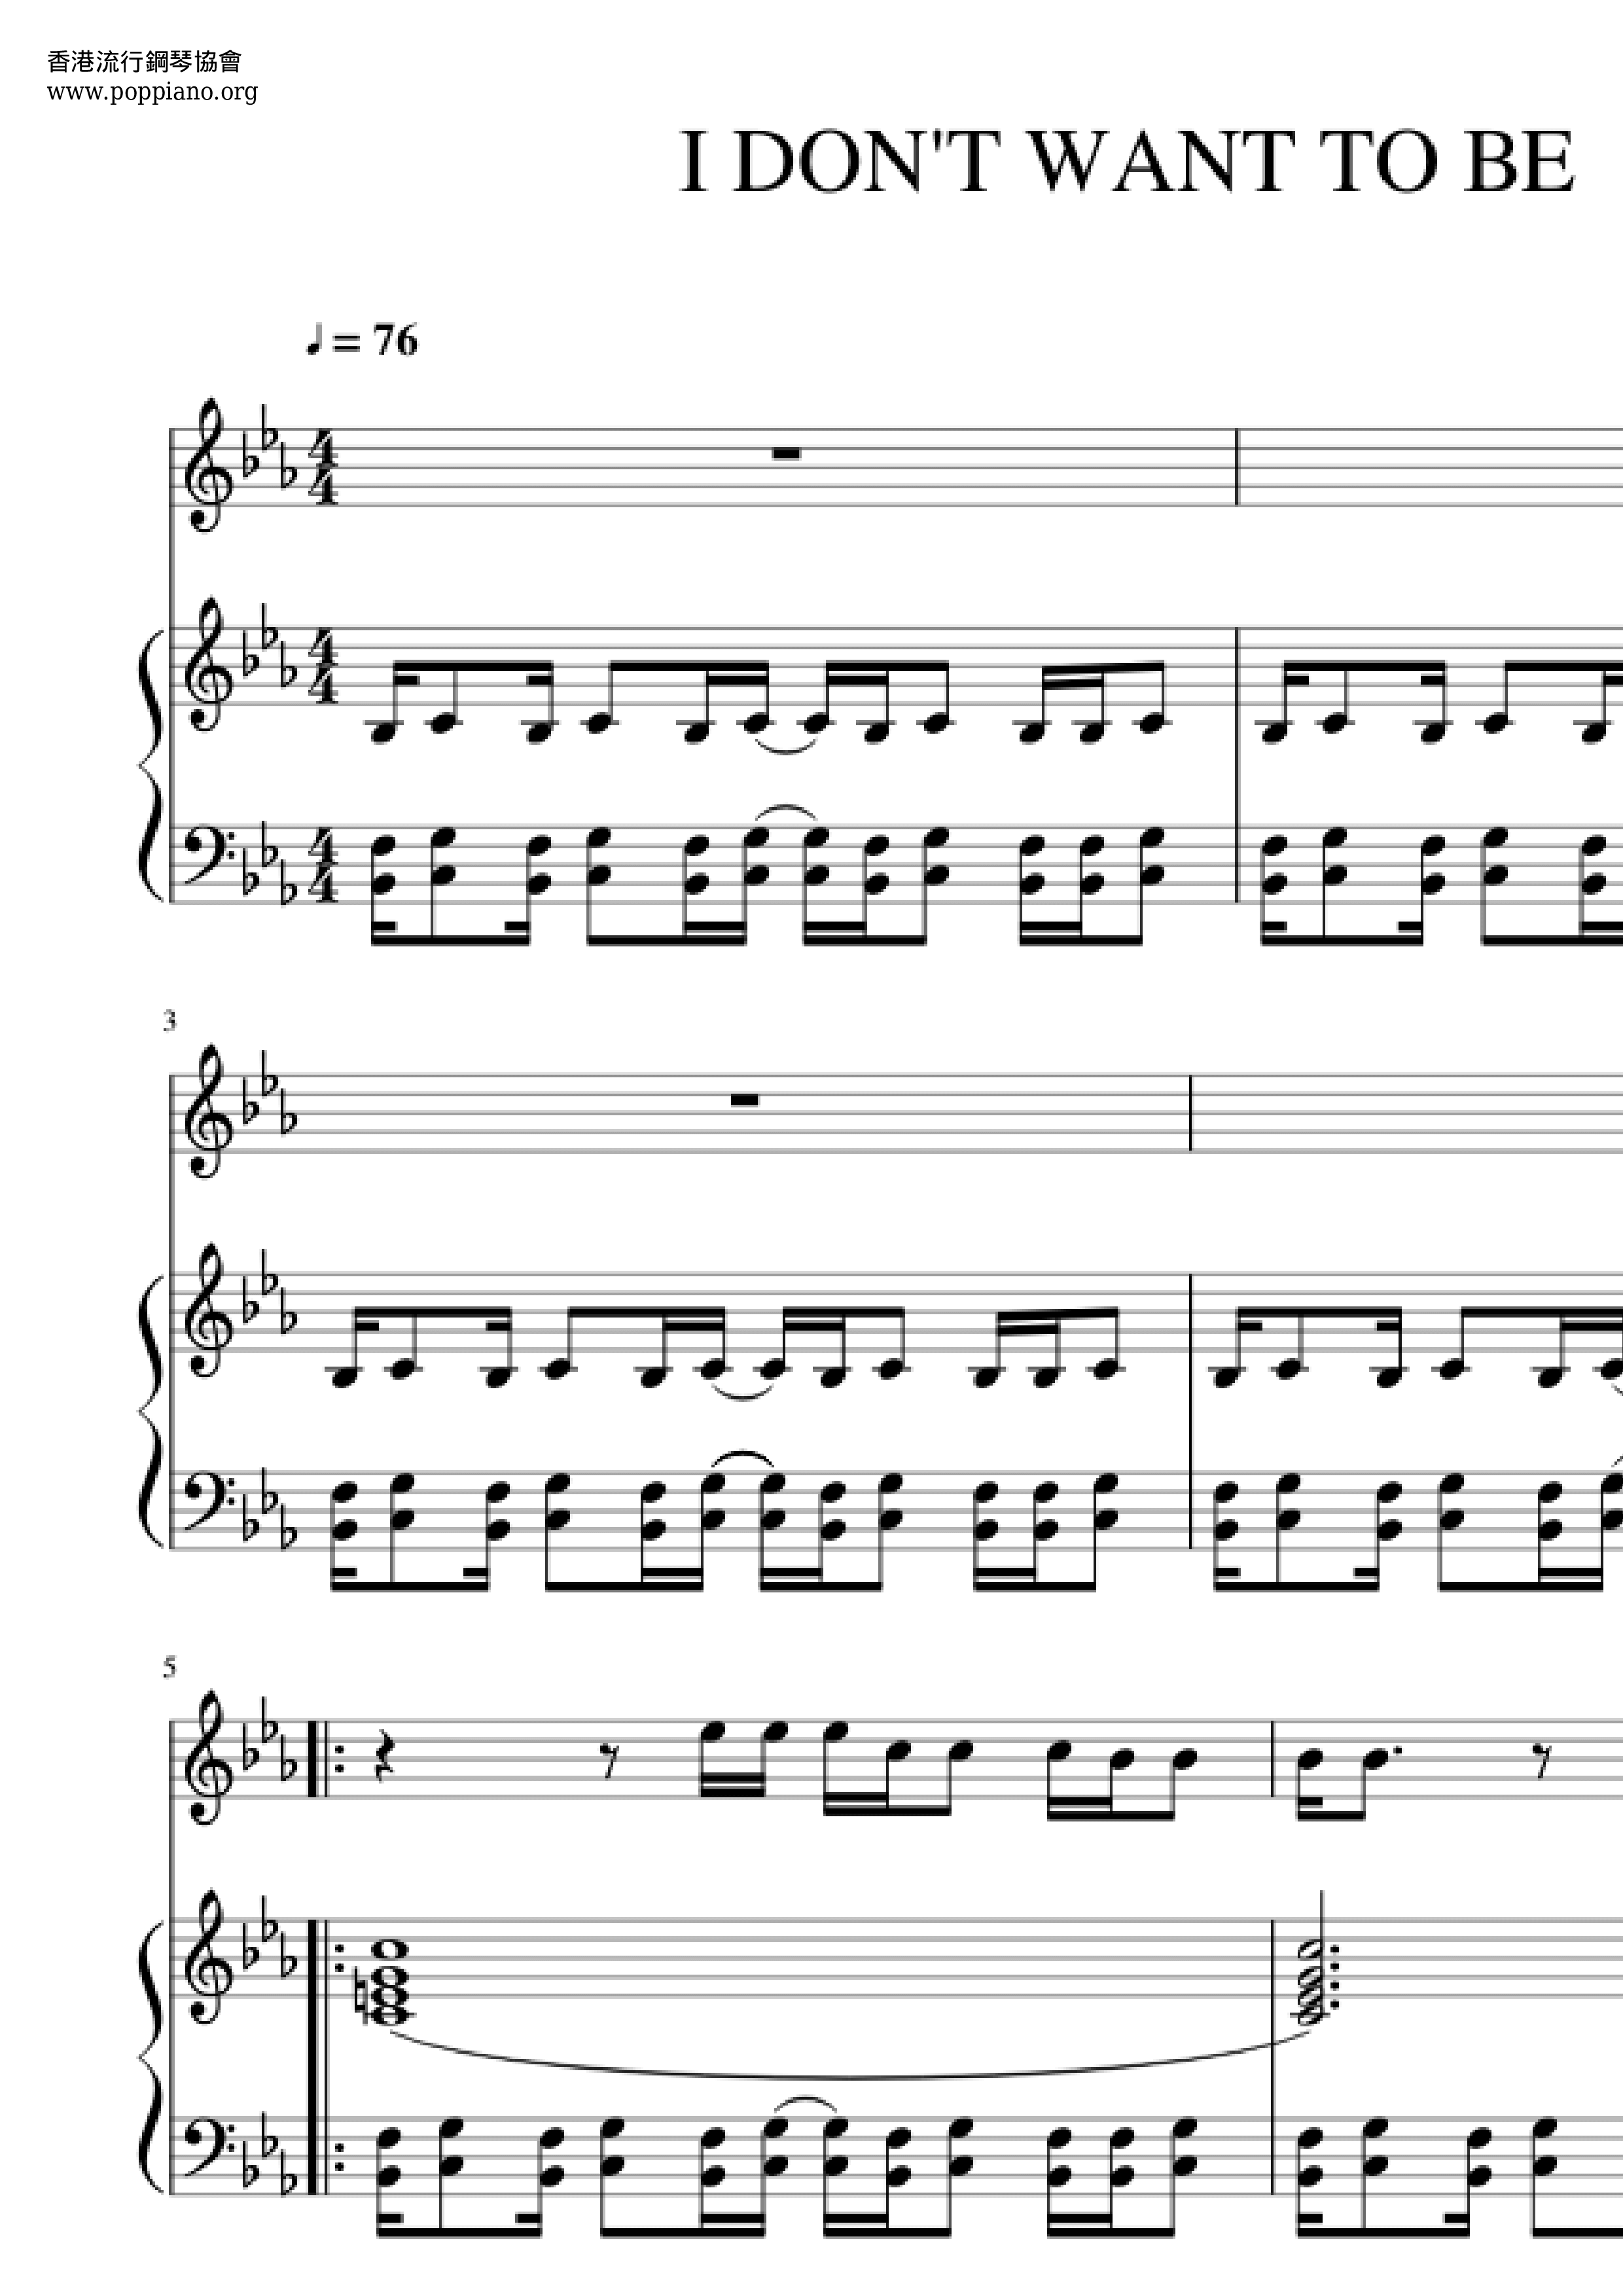 ☆ Gavin Degraw-I Don't Want Be Sheet Music pdf, - Free Download ☆